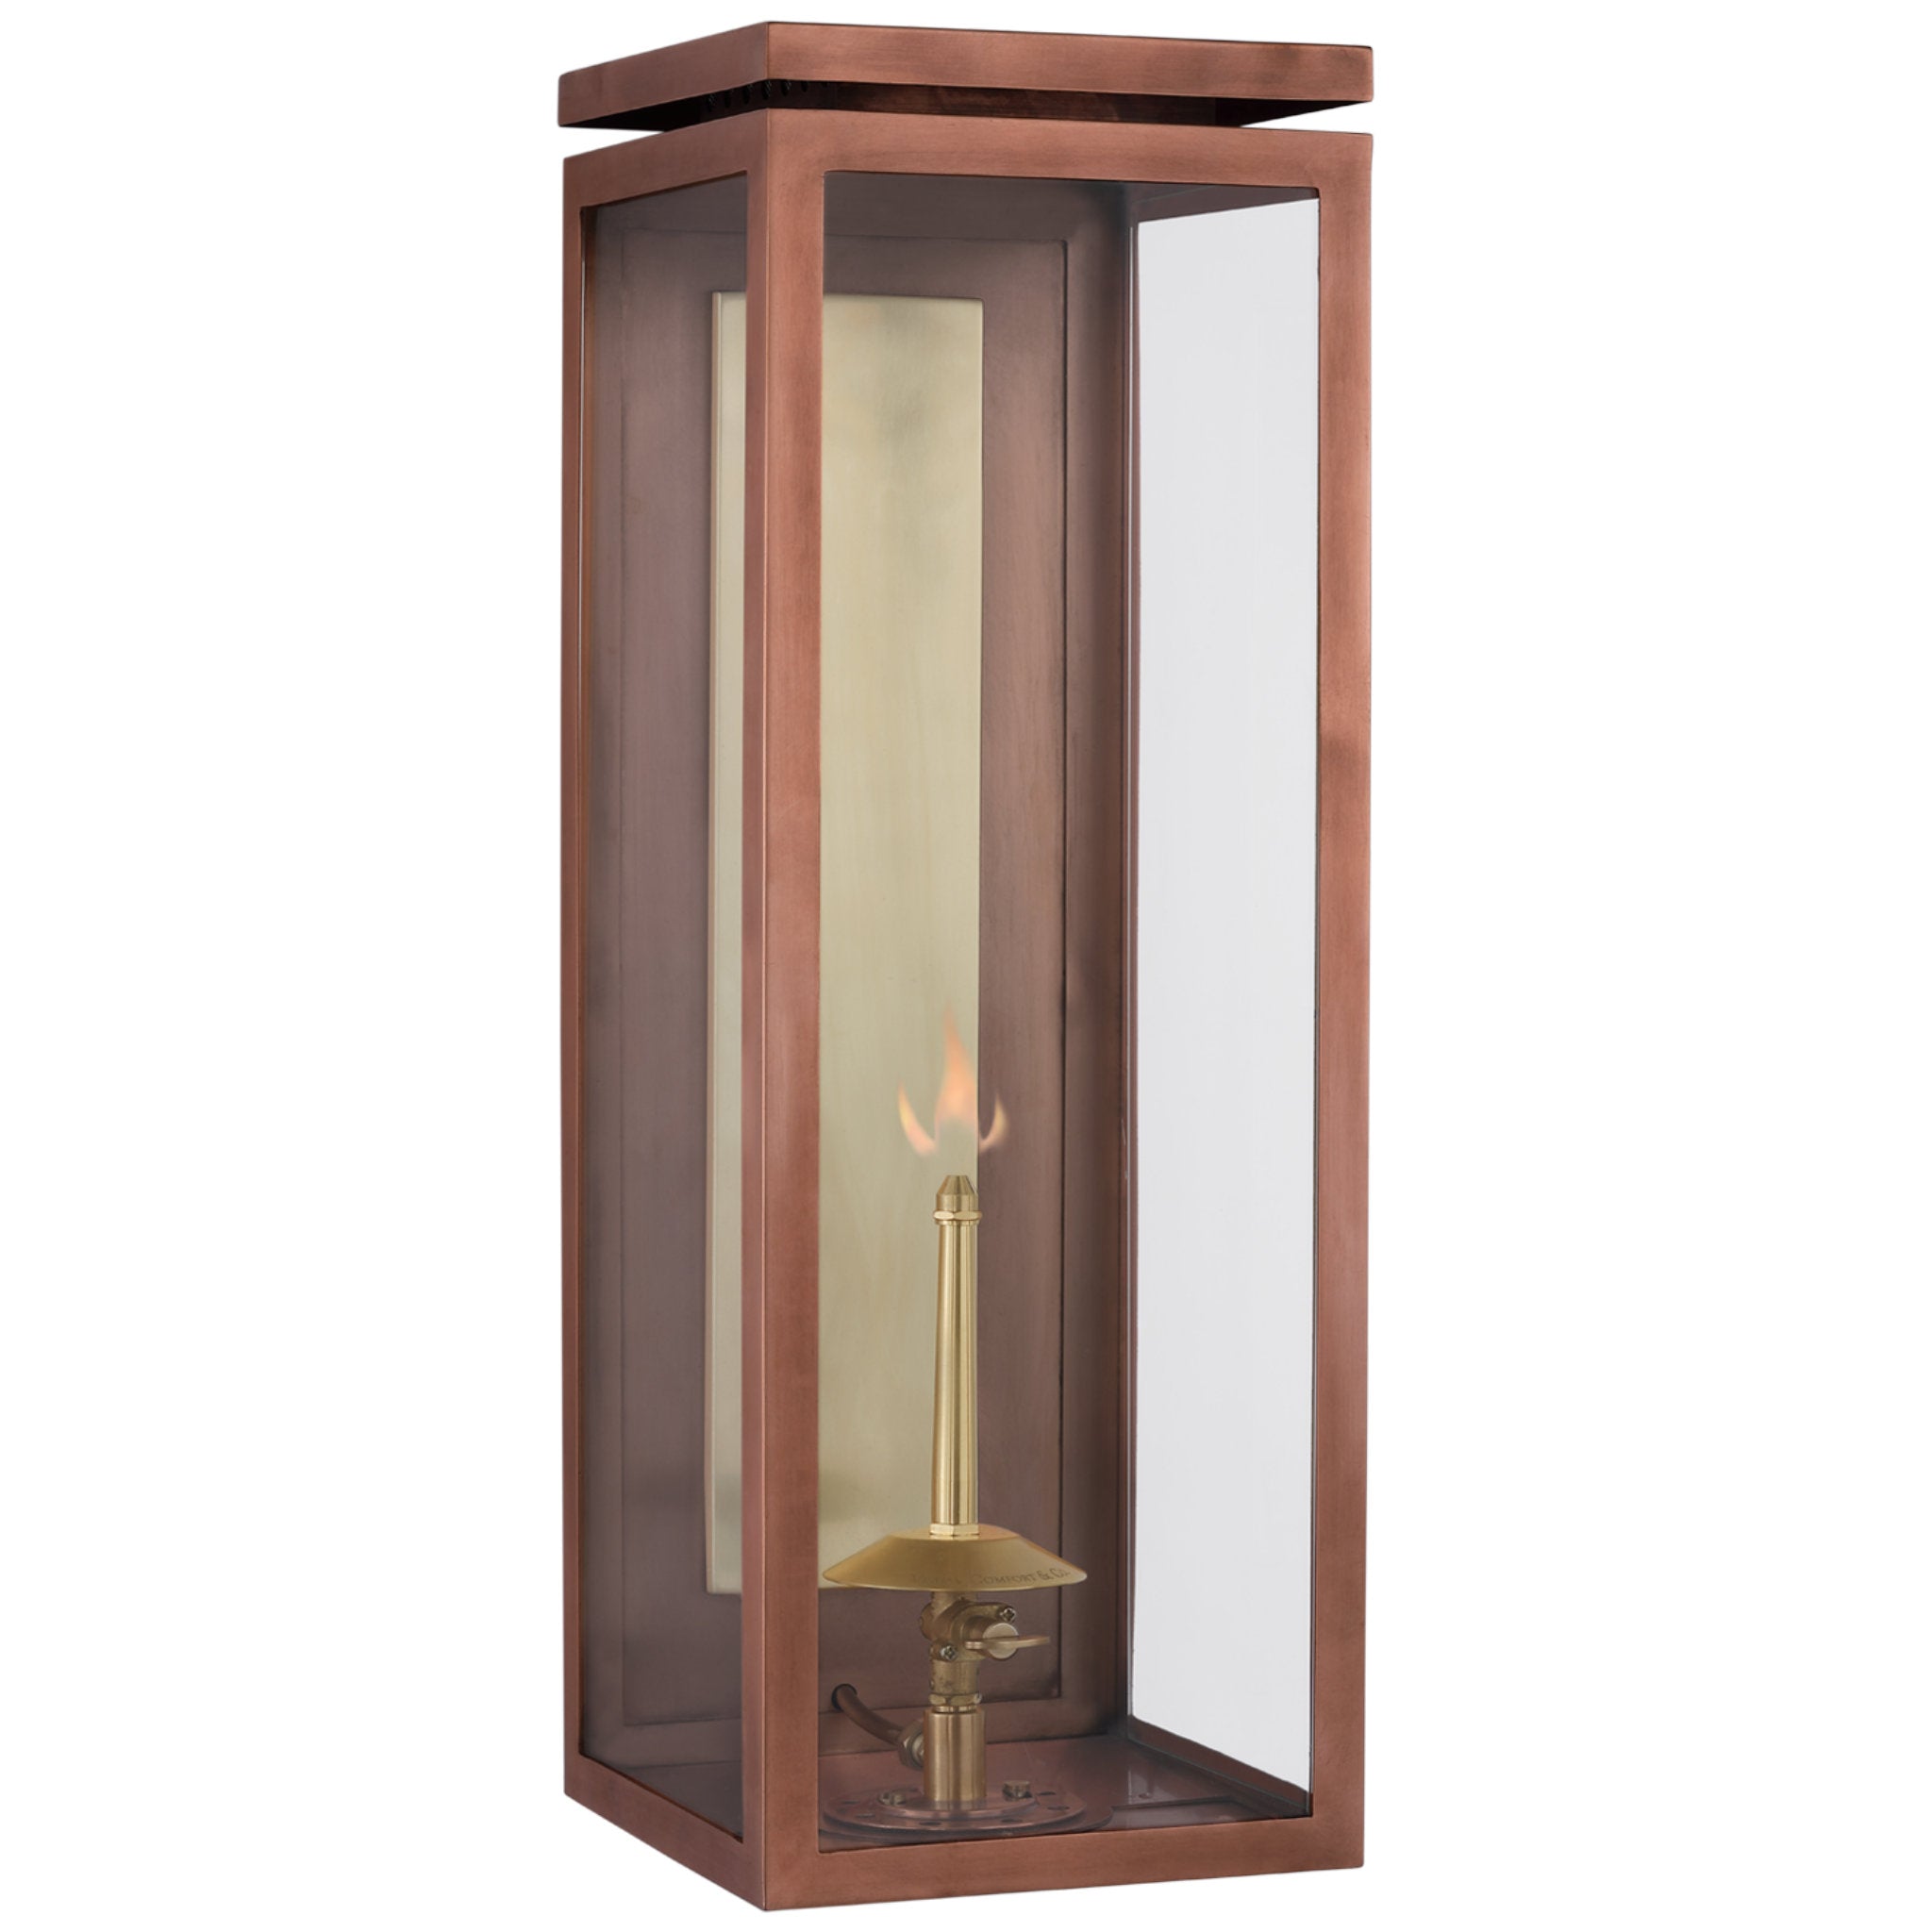 Chapman & Myers Fresno Large 3/4 Gas Wall Lantern in Soft Copper with Clear Glass